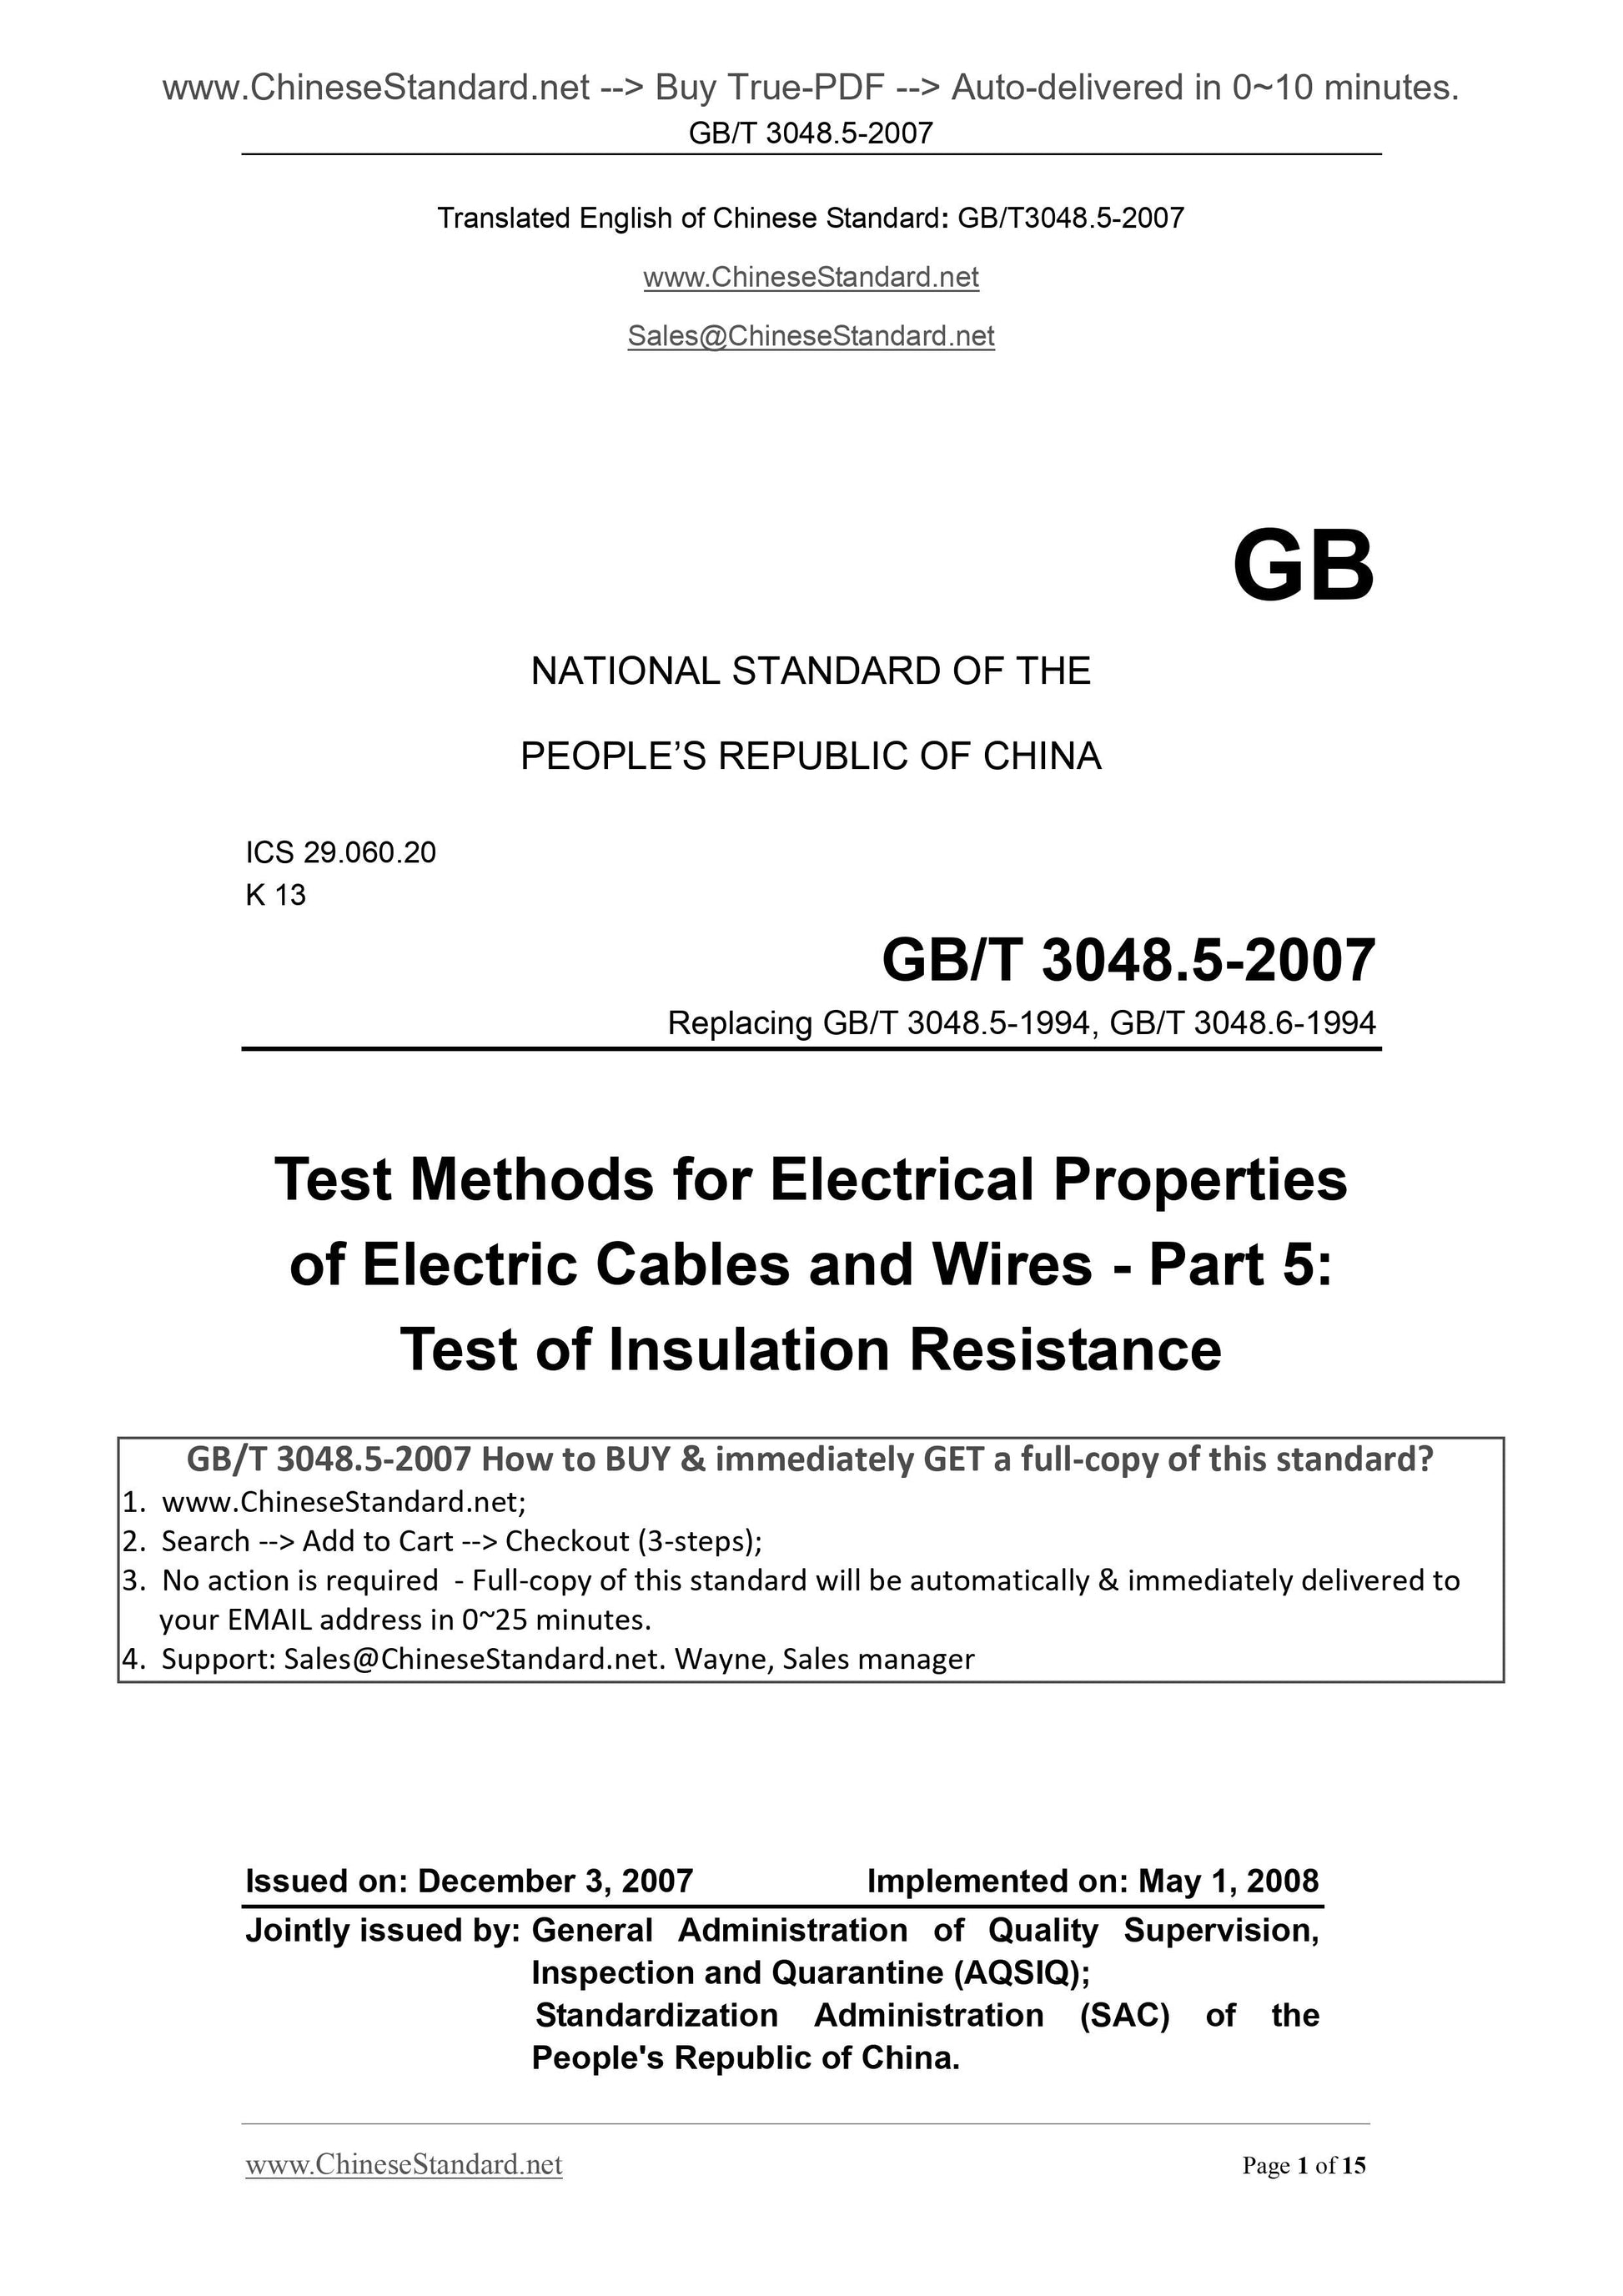 GB/T 3048.5-2007 Page 1